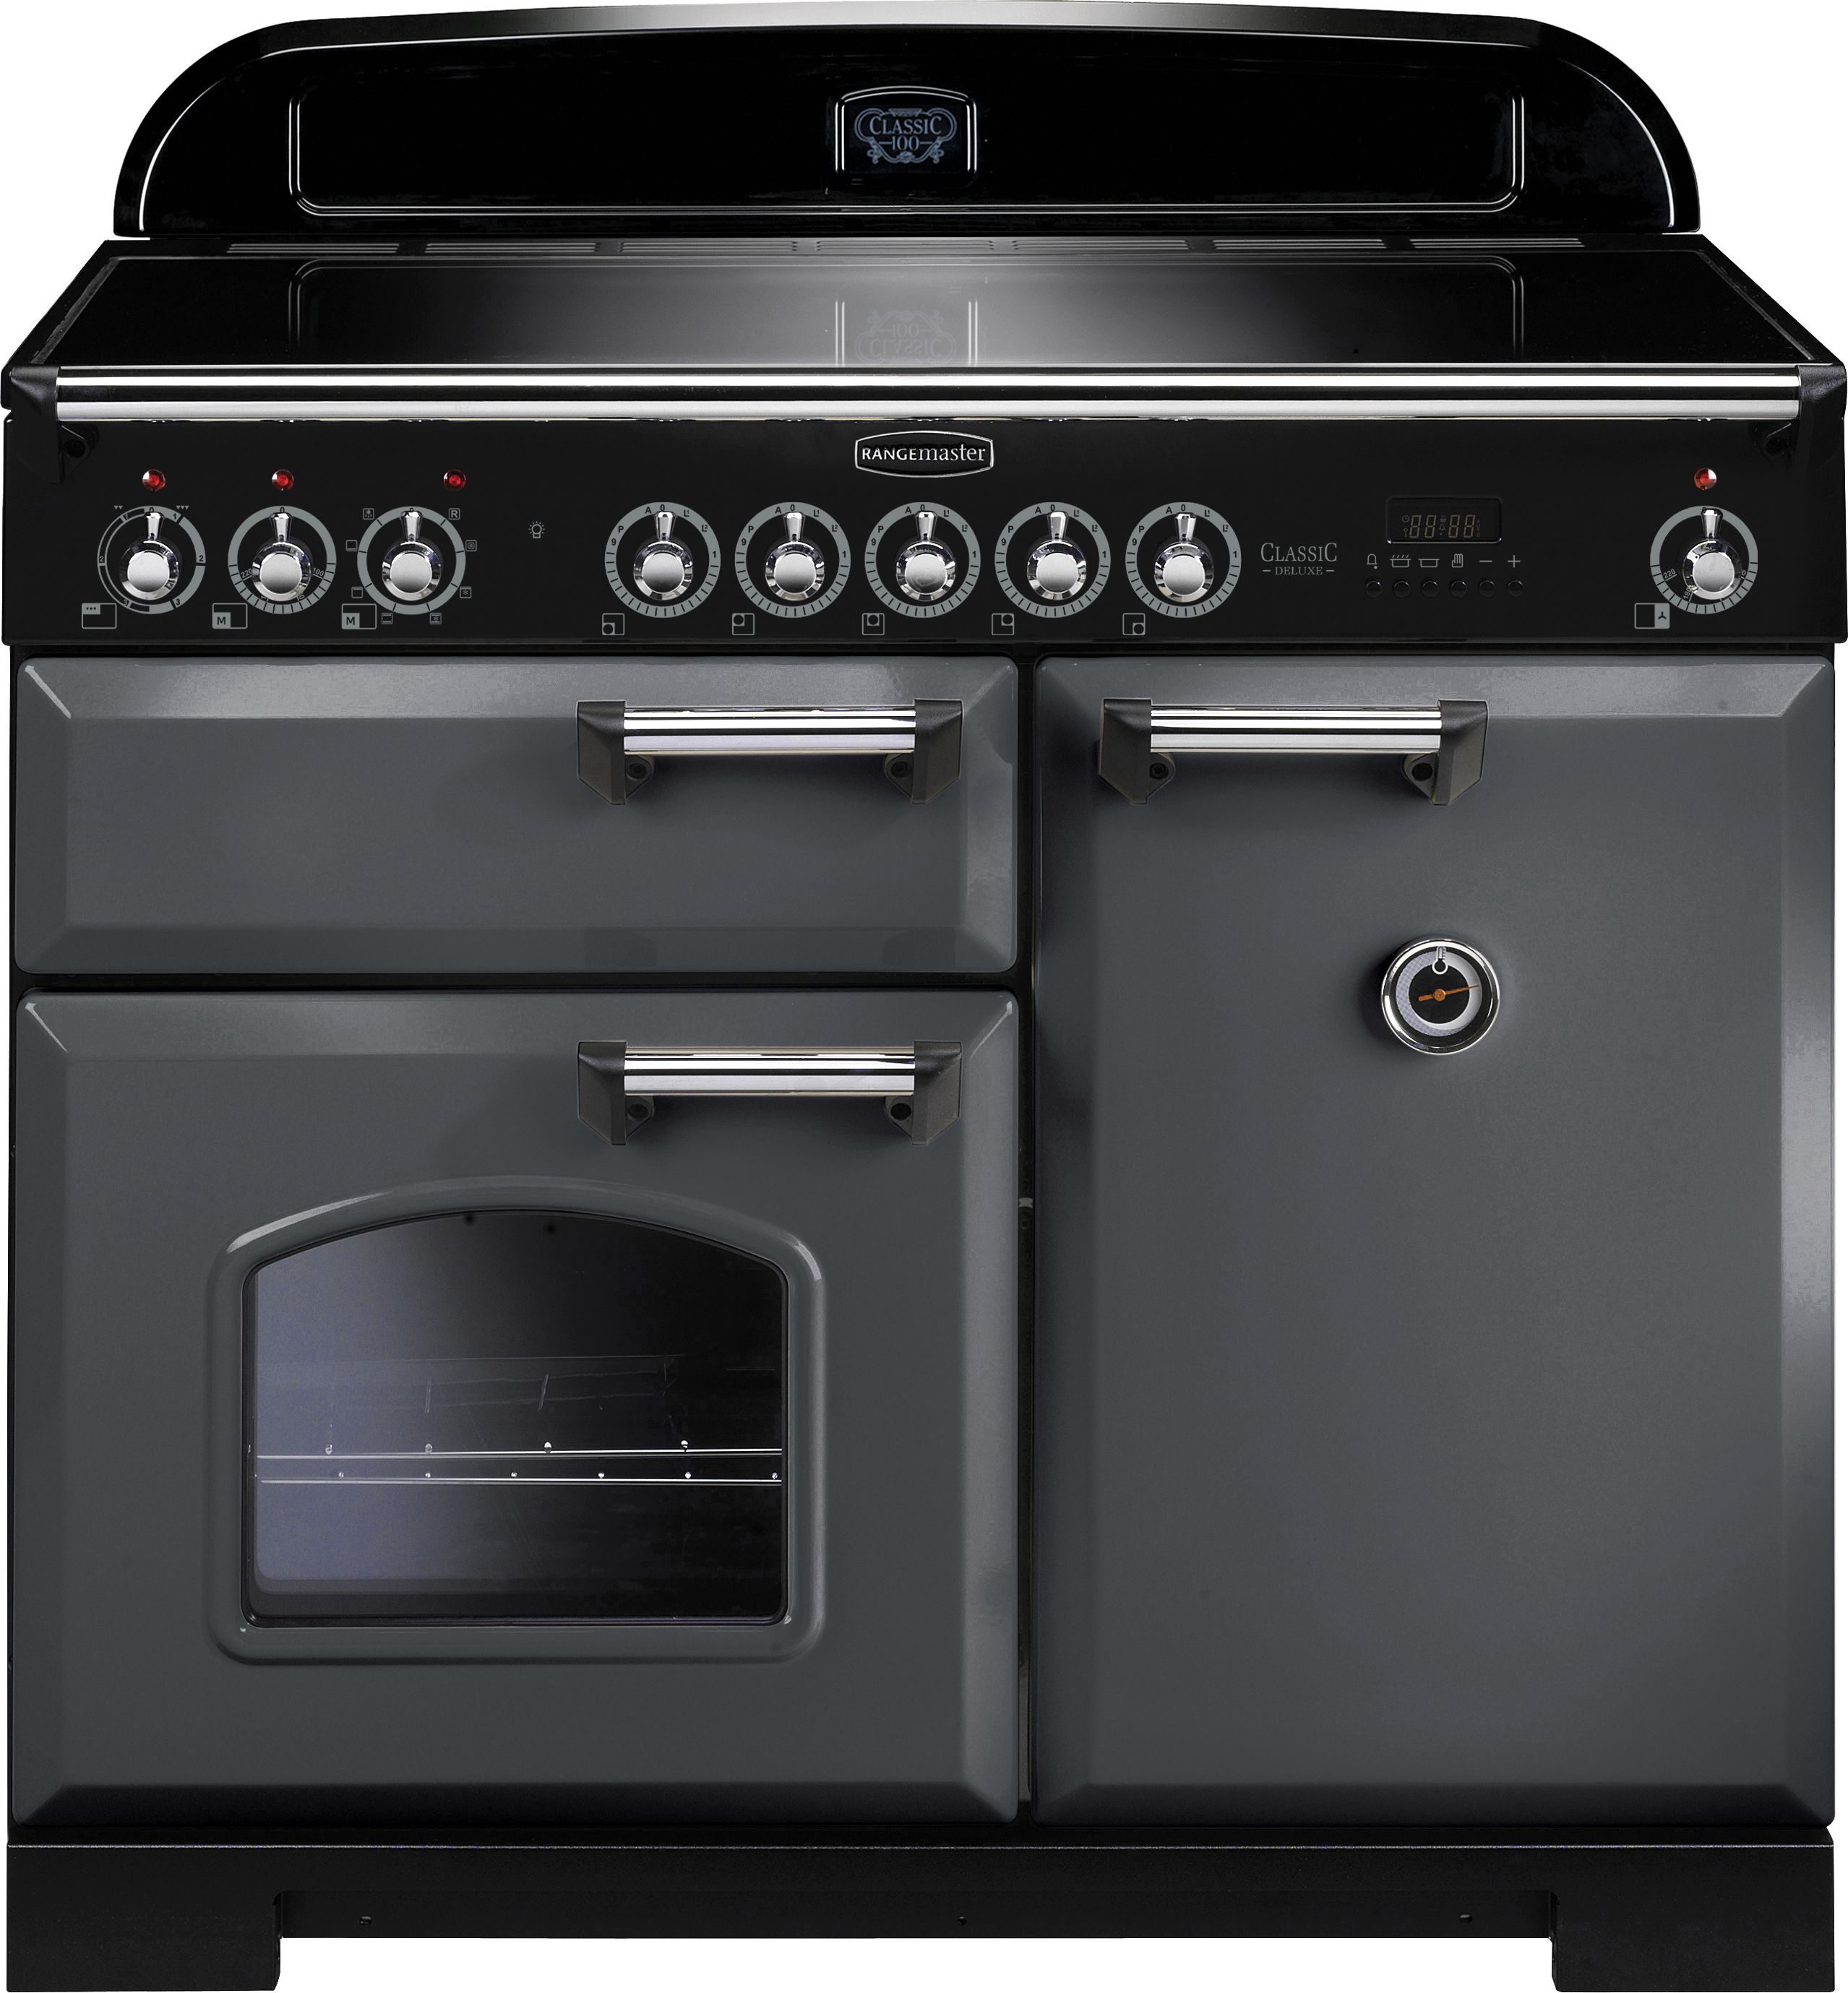 Rangemaster Classic Deluxe CDL100EISL/C 100cm Electric Range Cooker with Induction Hob - Slate / Chrome - A/A Rated, Grey